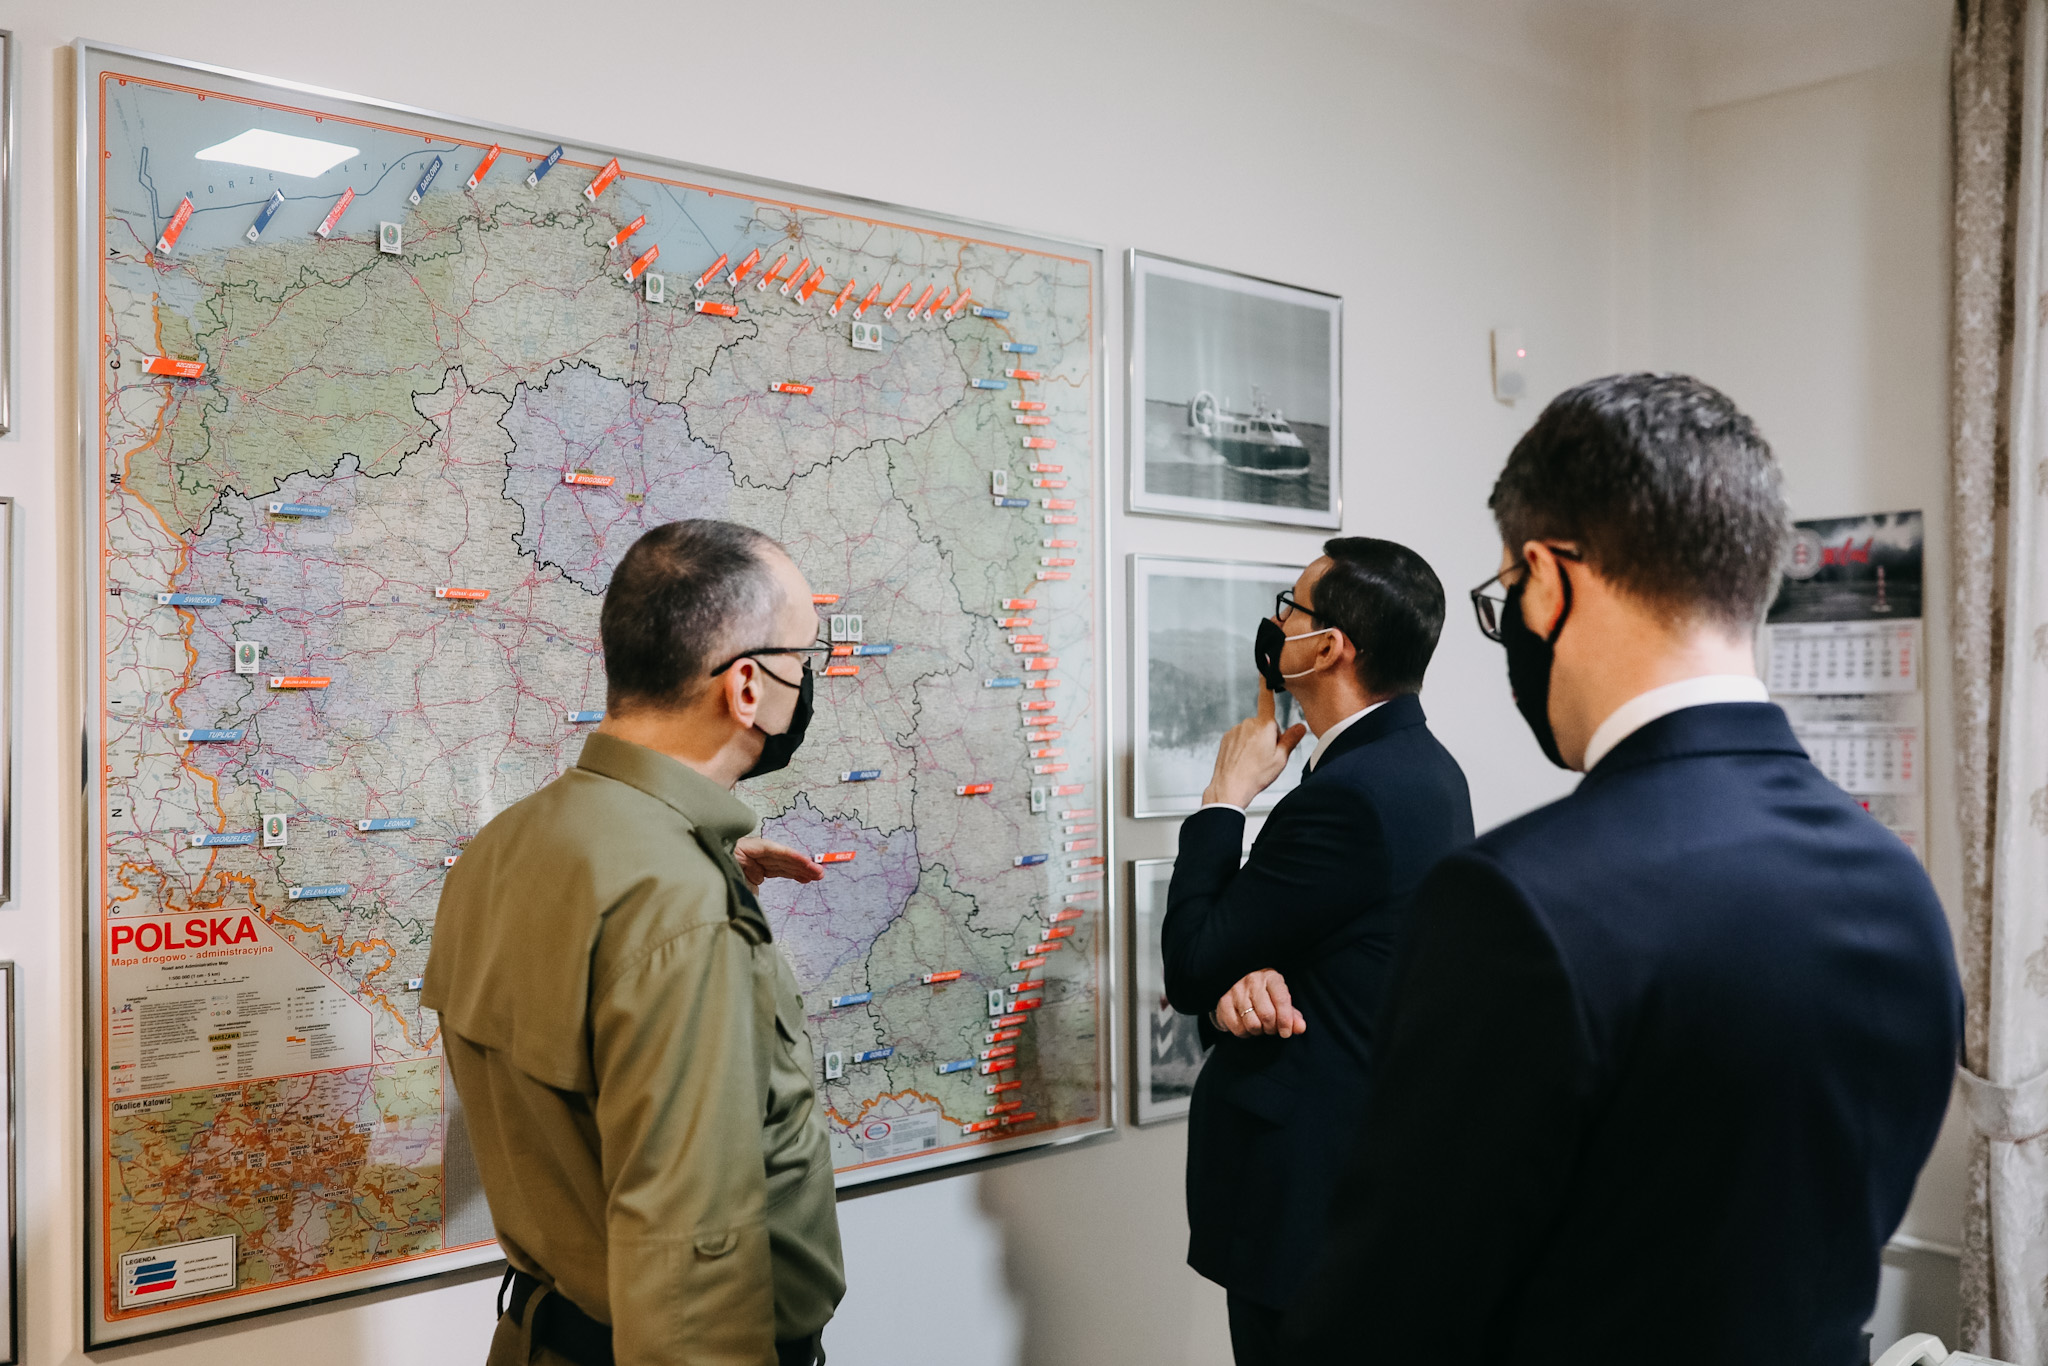 Three individuals look at a map in Poland that shows all border crossings.